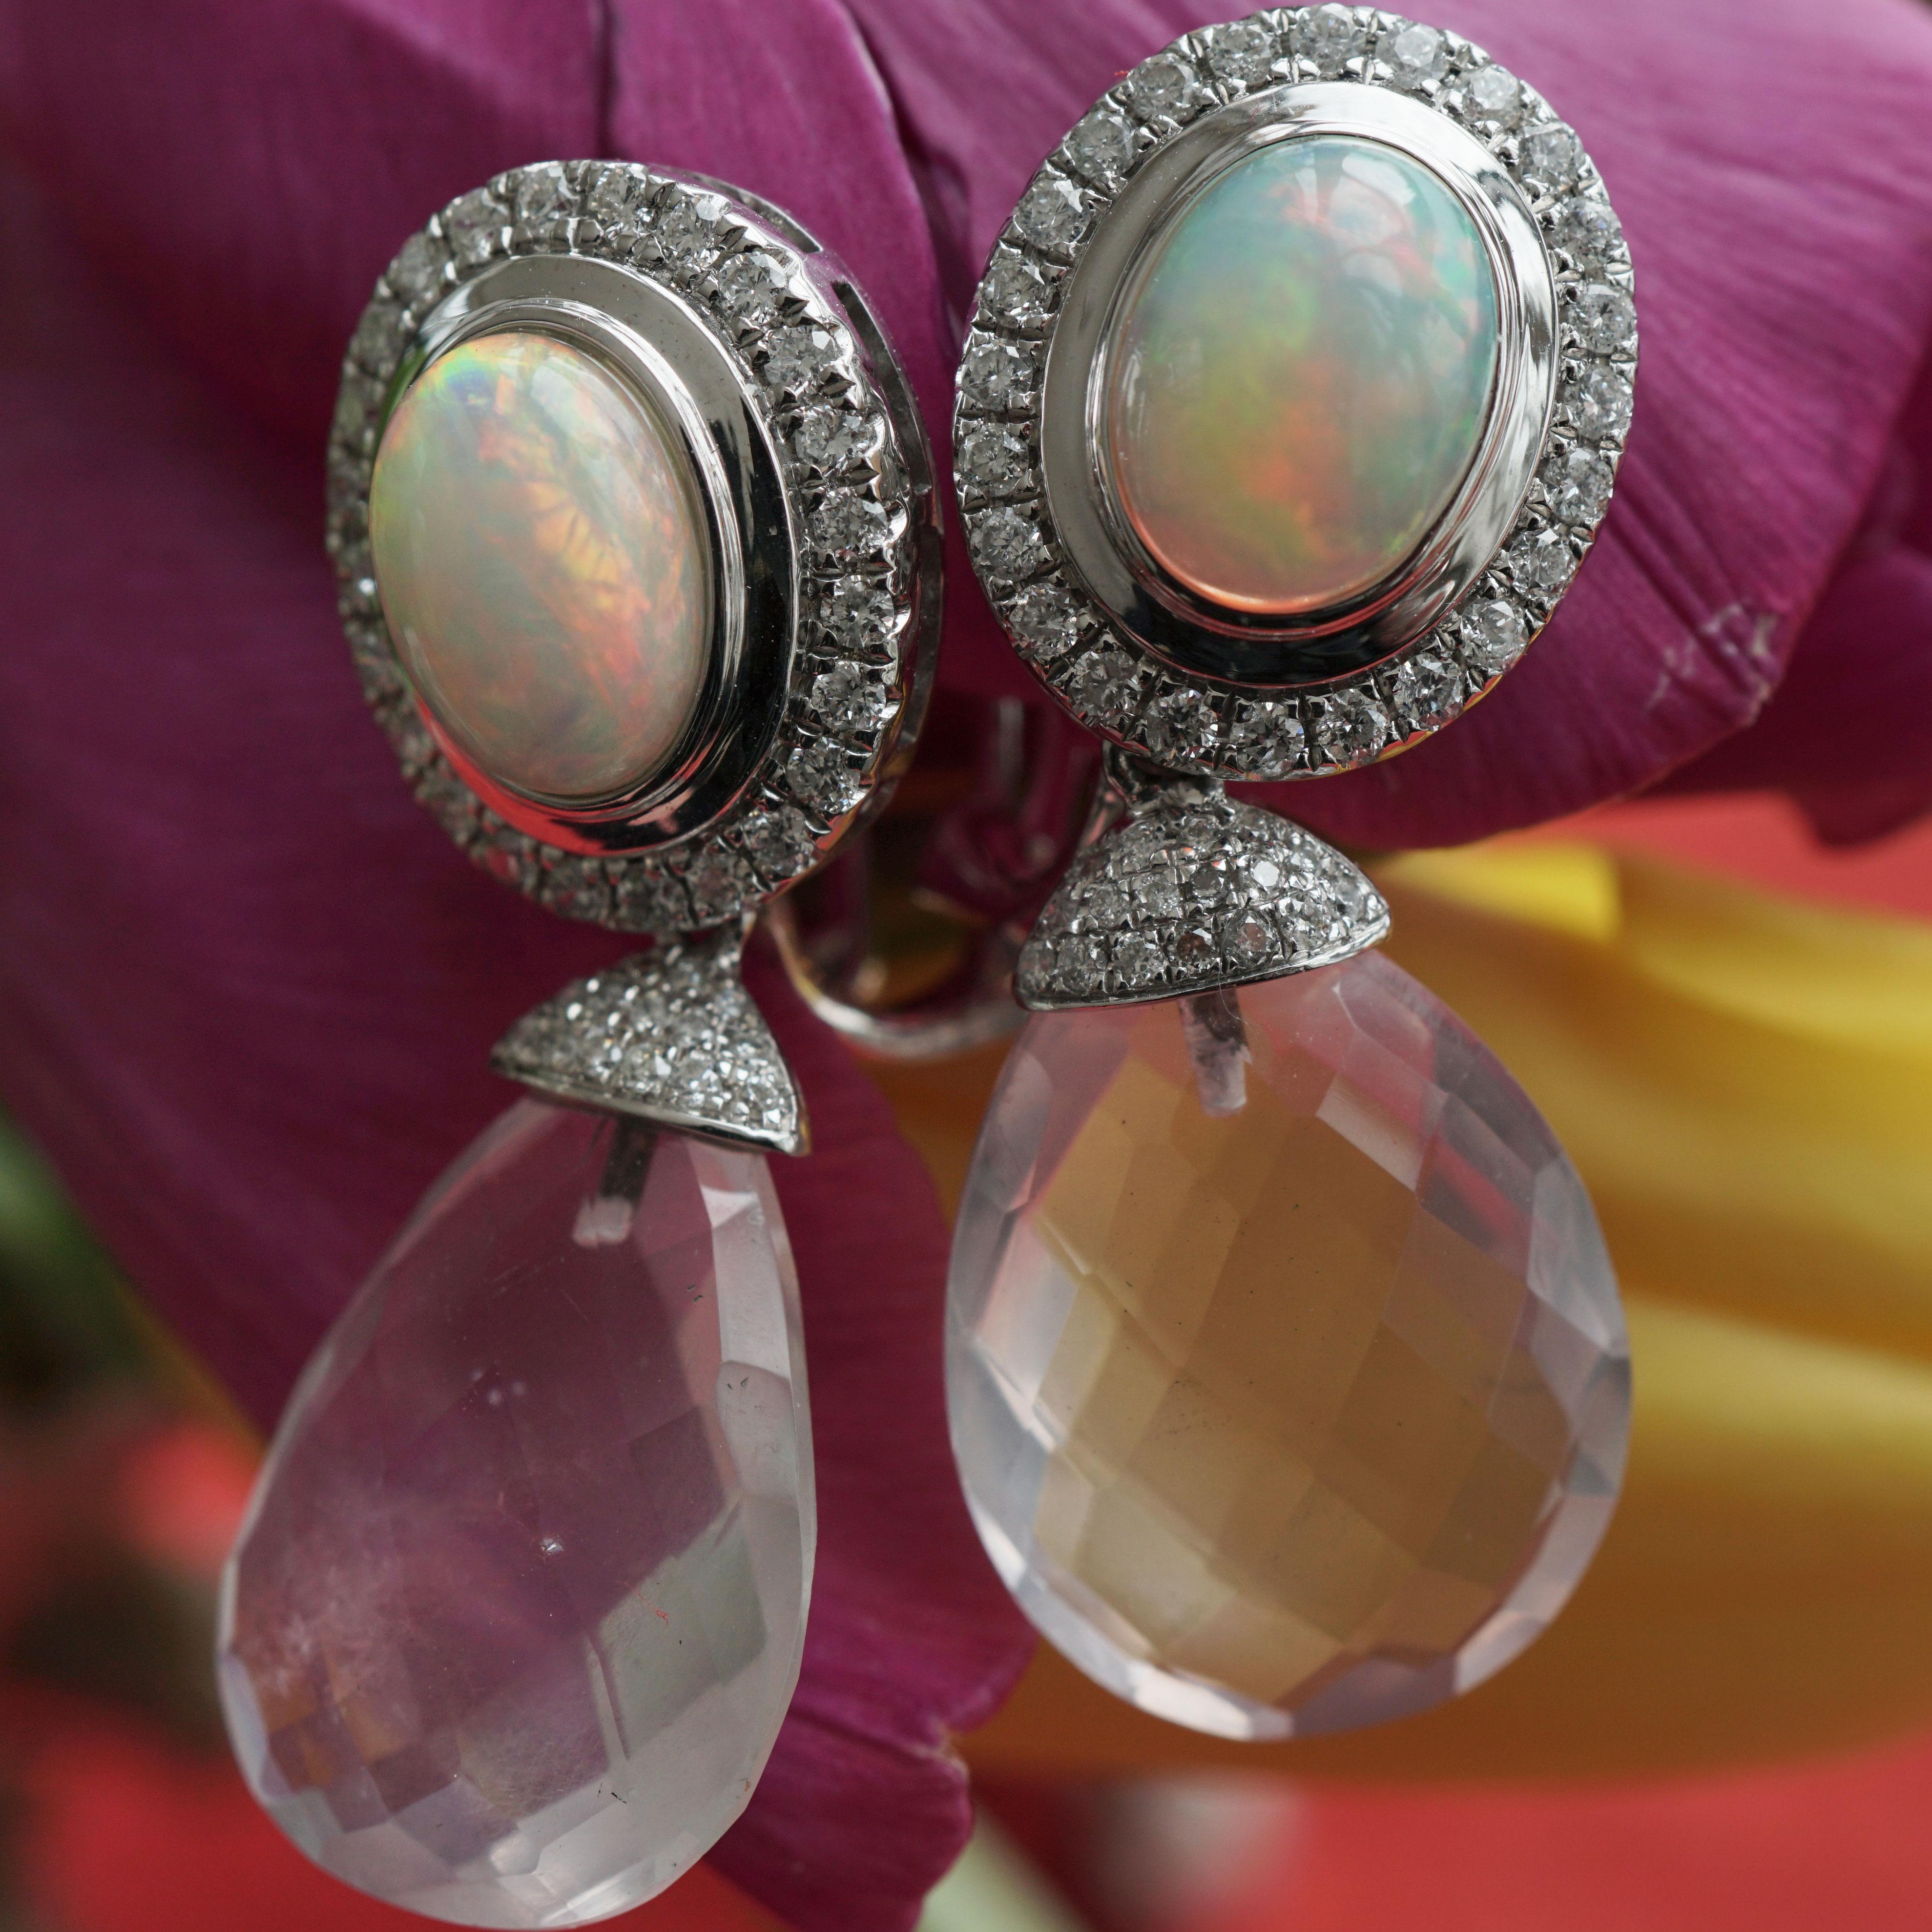 Pastel tones combined as magnificent earrings with clip device in 750 white gold, 2 faceted rose quartz pampas total approx. 13.10 ct, 2 full opals total approx. 1.90 ct, full cut brilliants total approx. 0.50 ct, W (white) / SI1-2 (small